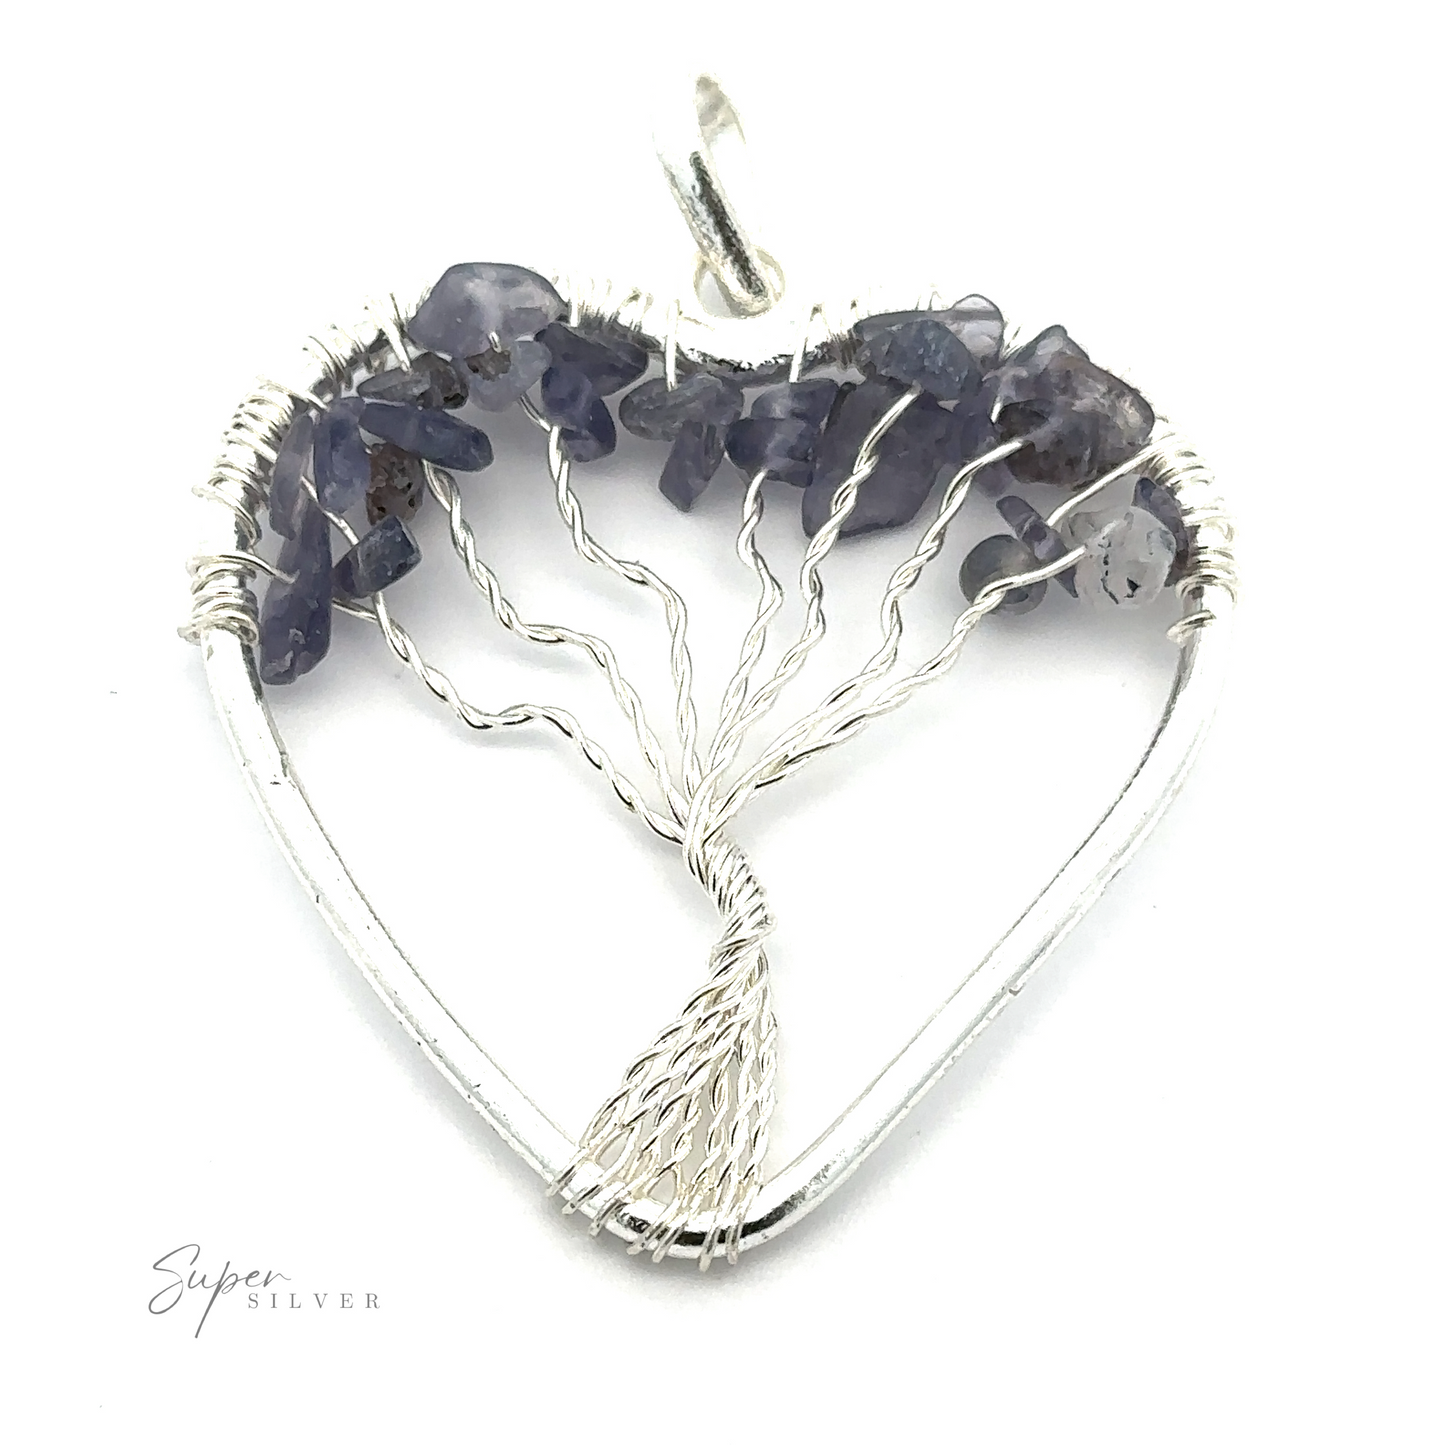 
                  
                    A Heart Shaped Tree of Life Pendant with a wire-wrapped tree of life design, adorned with small blue stones at the top, against a white background. The logo "Super Silver" is visible in the lower left corner.
                  
                